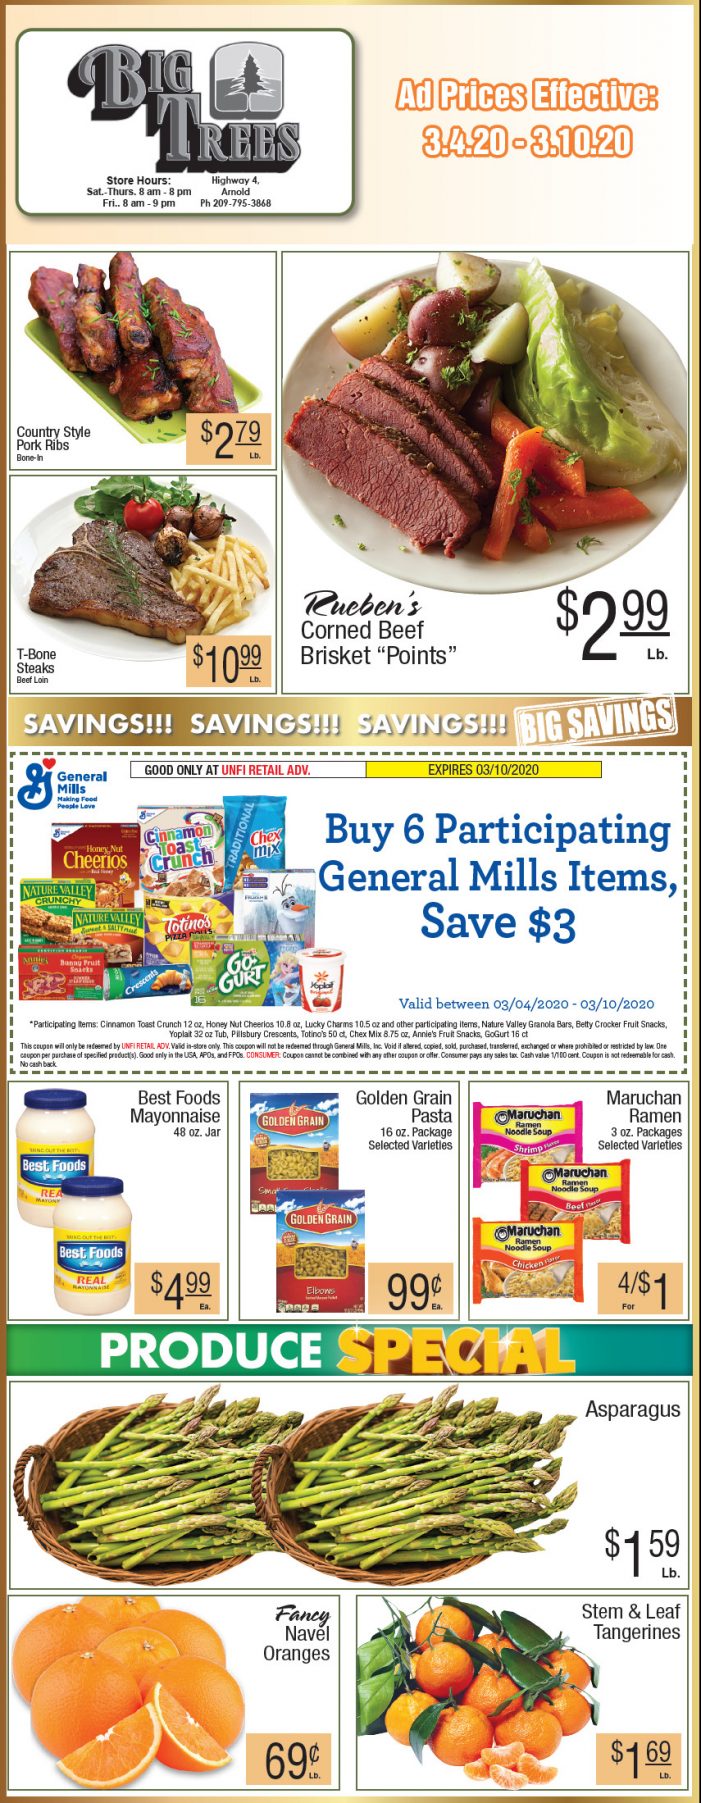 Big Trees Market Weekly Ad & Grocery Specials Through March 10th